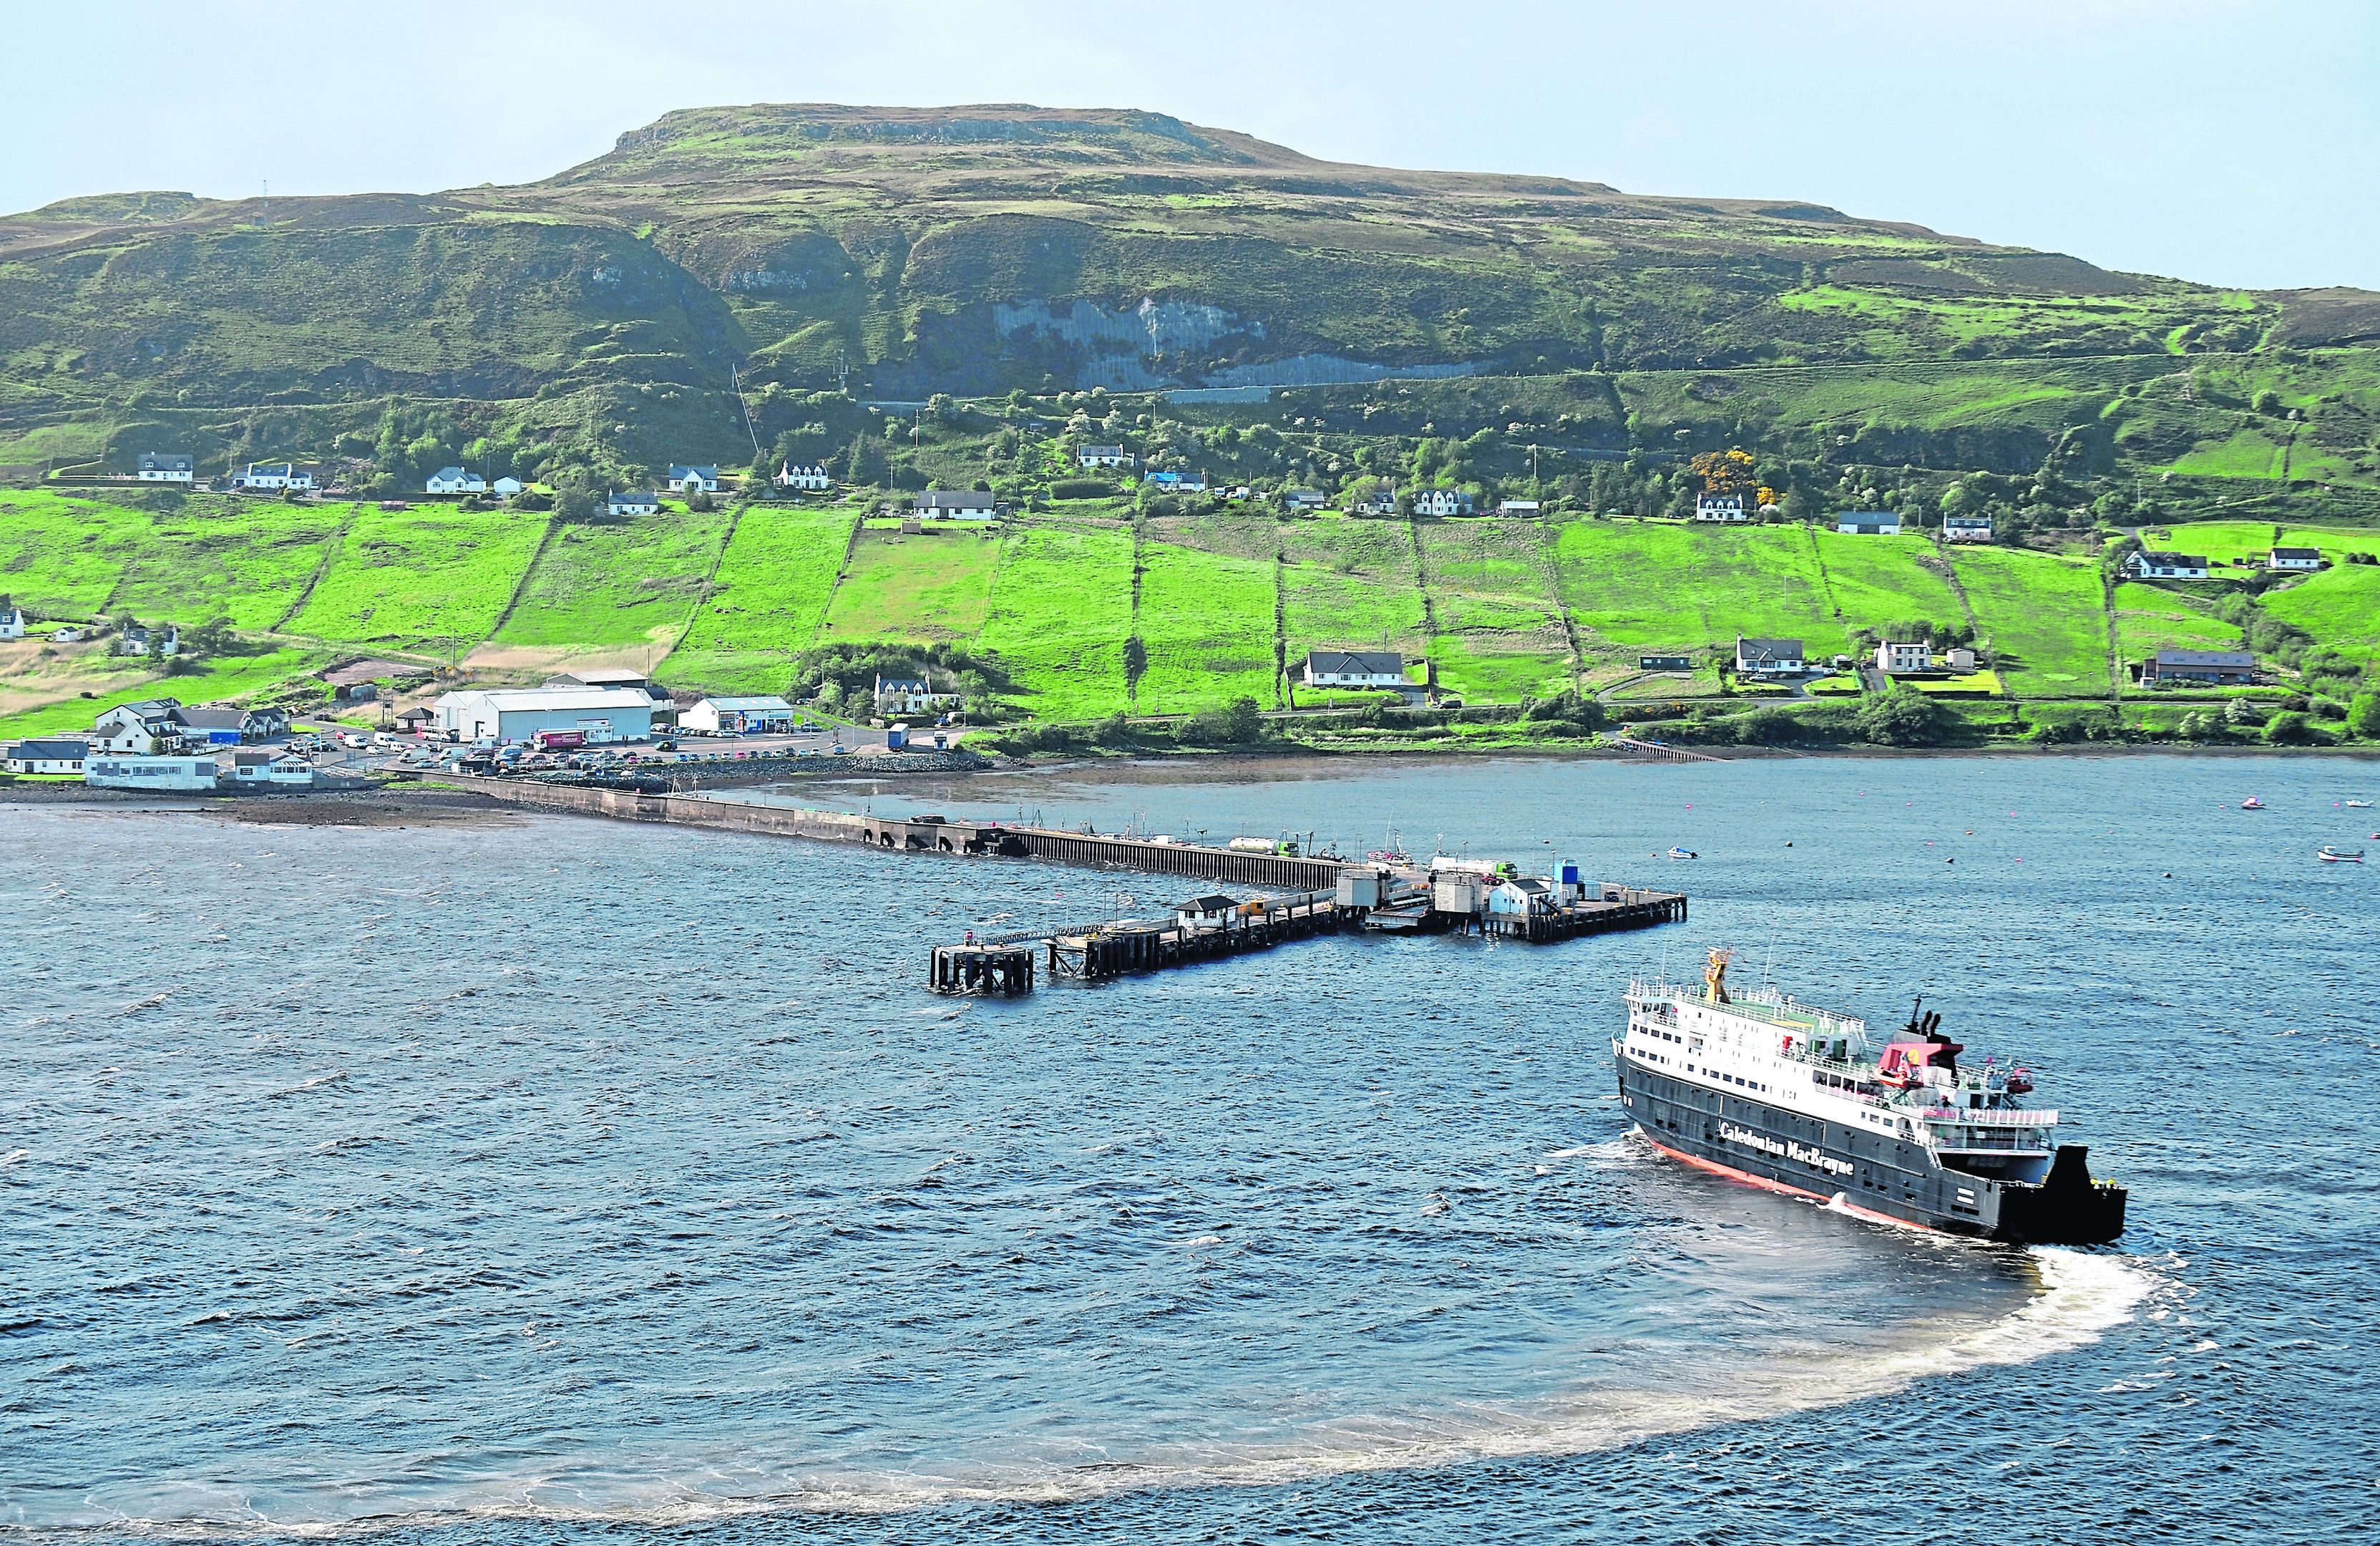 The Caledonian MacBrayne ferry, 'Hebrides' arrives in Uig, Skye from Harris and North Uist in the Outer Hebrides.